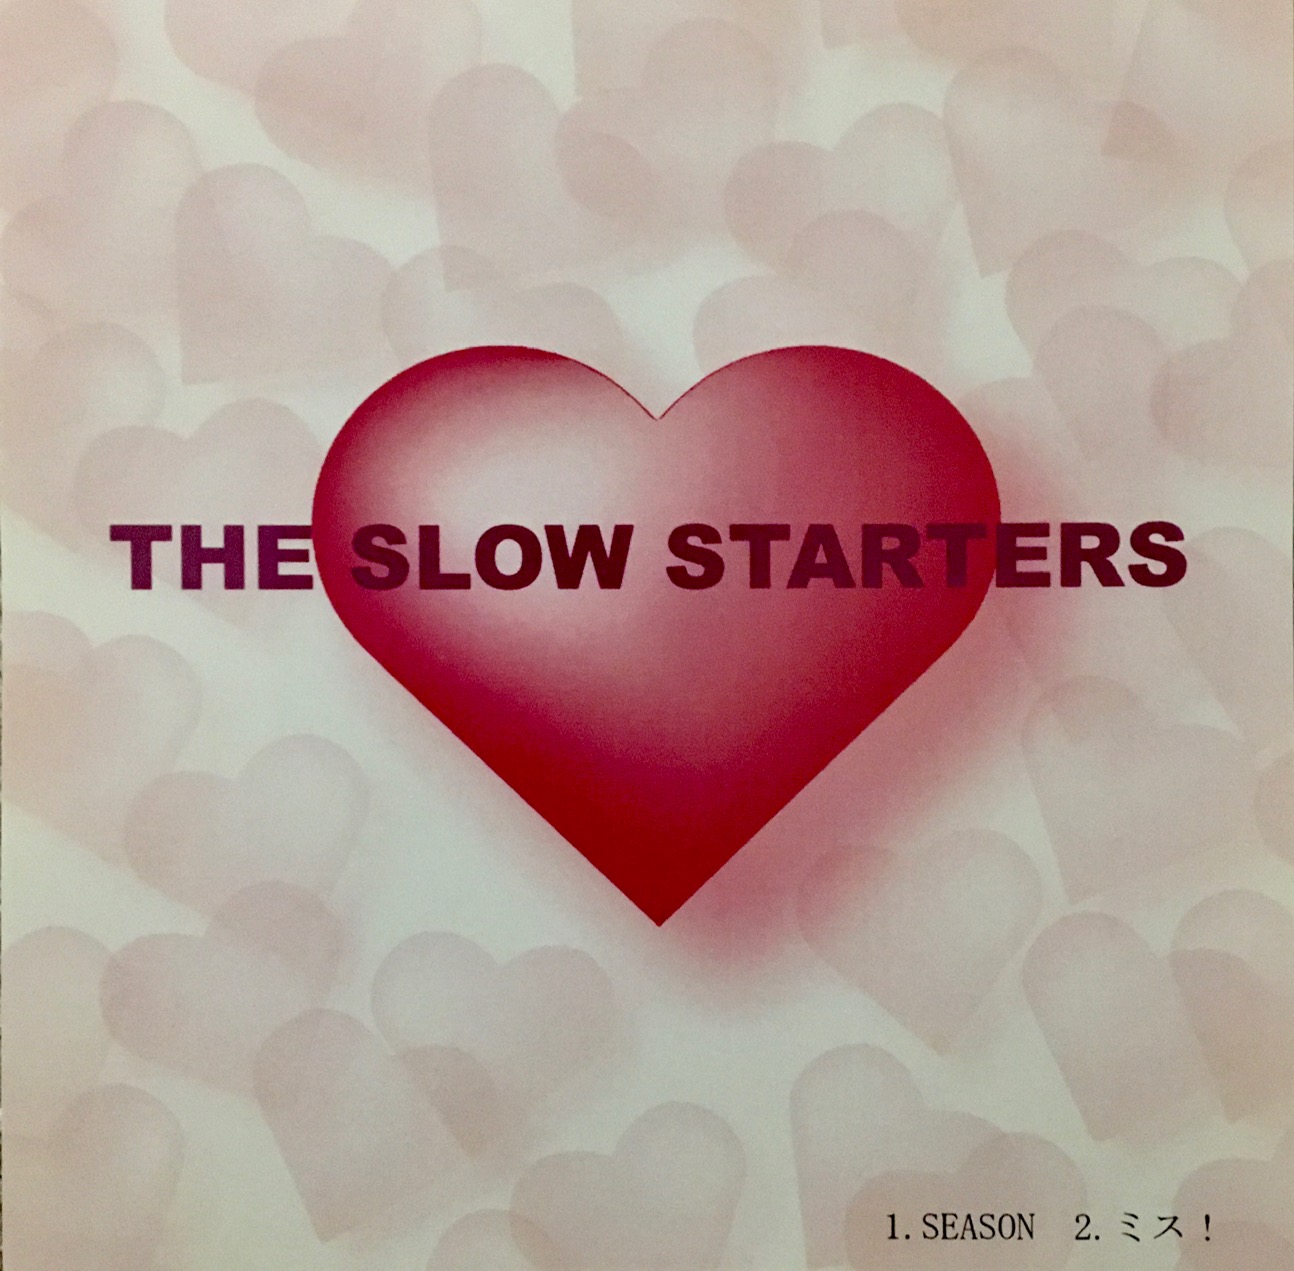 THE SLOW STARTERS